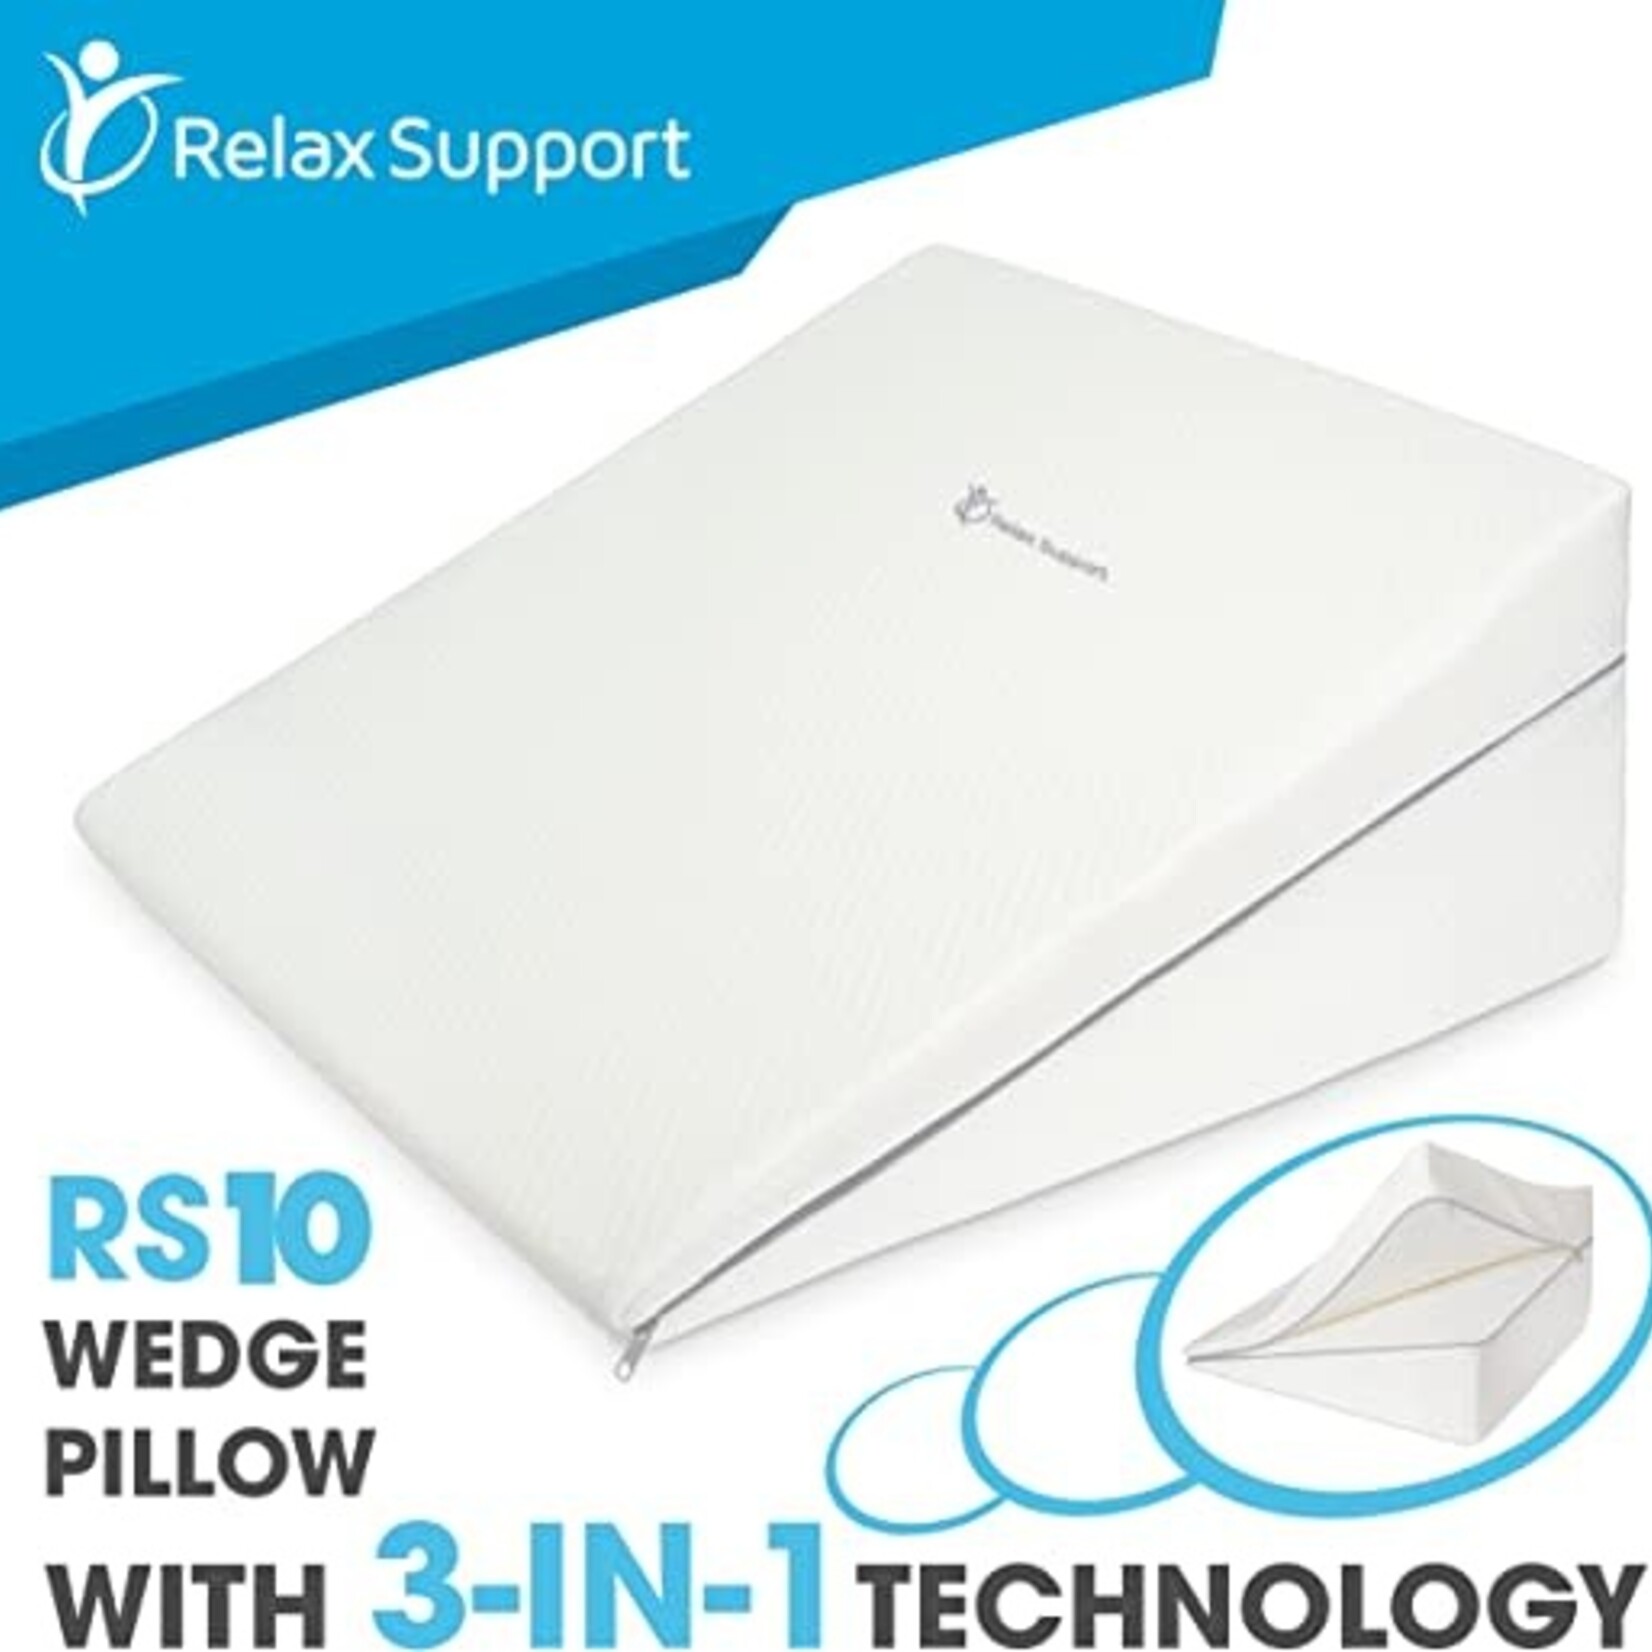 Relax Support Bed Wedge Pillow RS10